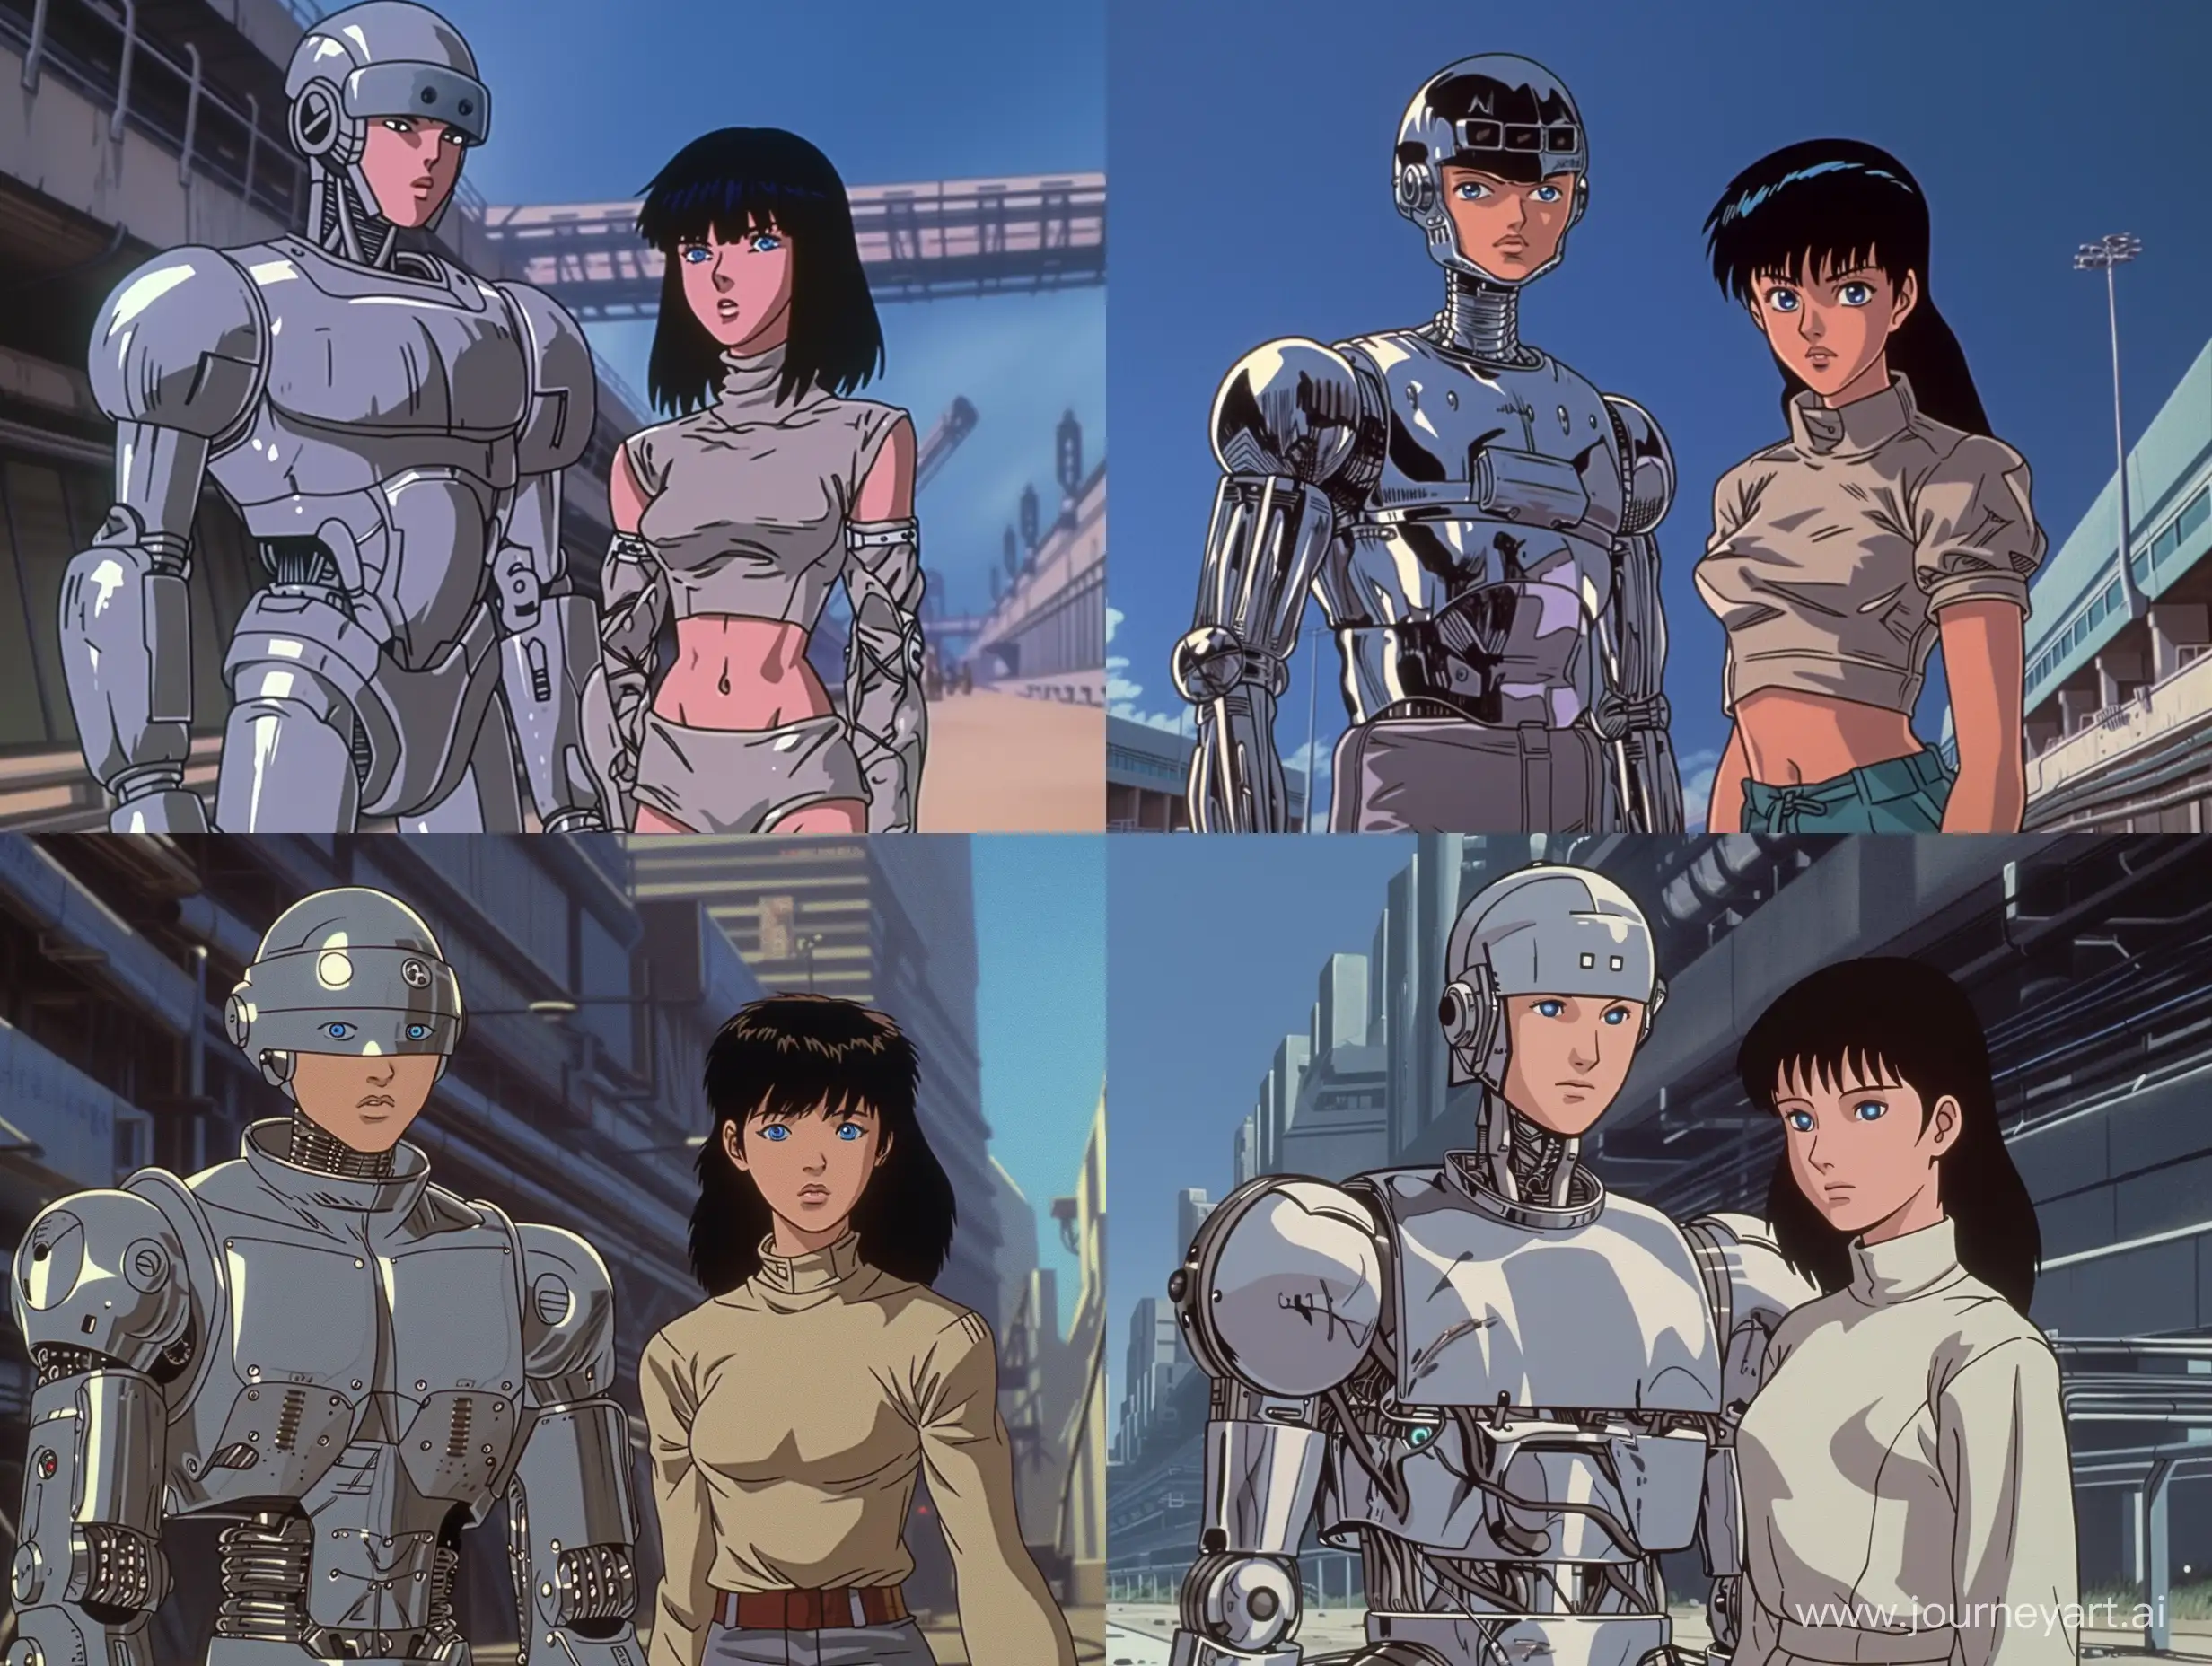 a old 90s cartoon still of a silver cyborg male standing next to his female partner, nostalgia, anime, akira 1988 still, they have blue eyes, standing in a open area, full body, outside city environment, dystopian, 
